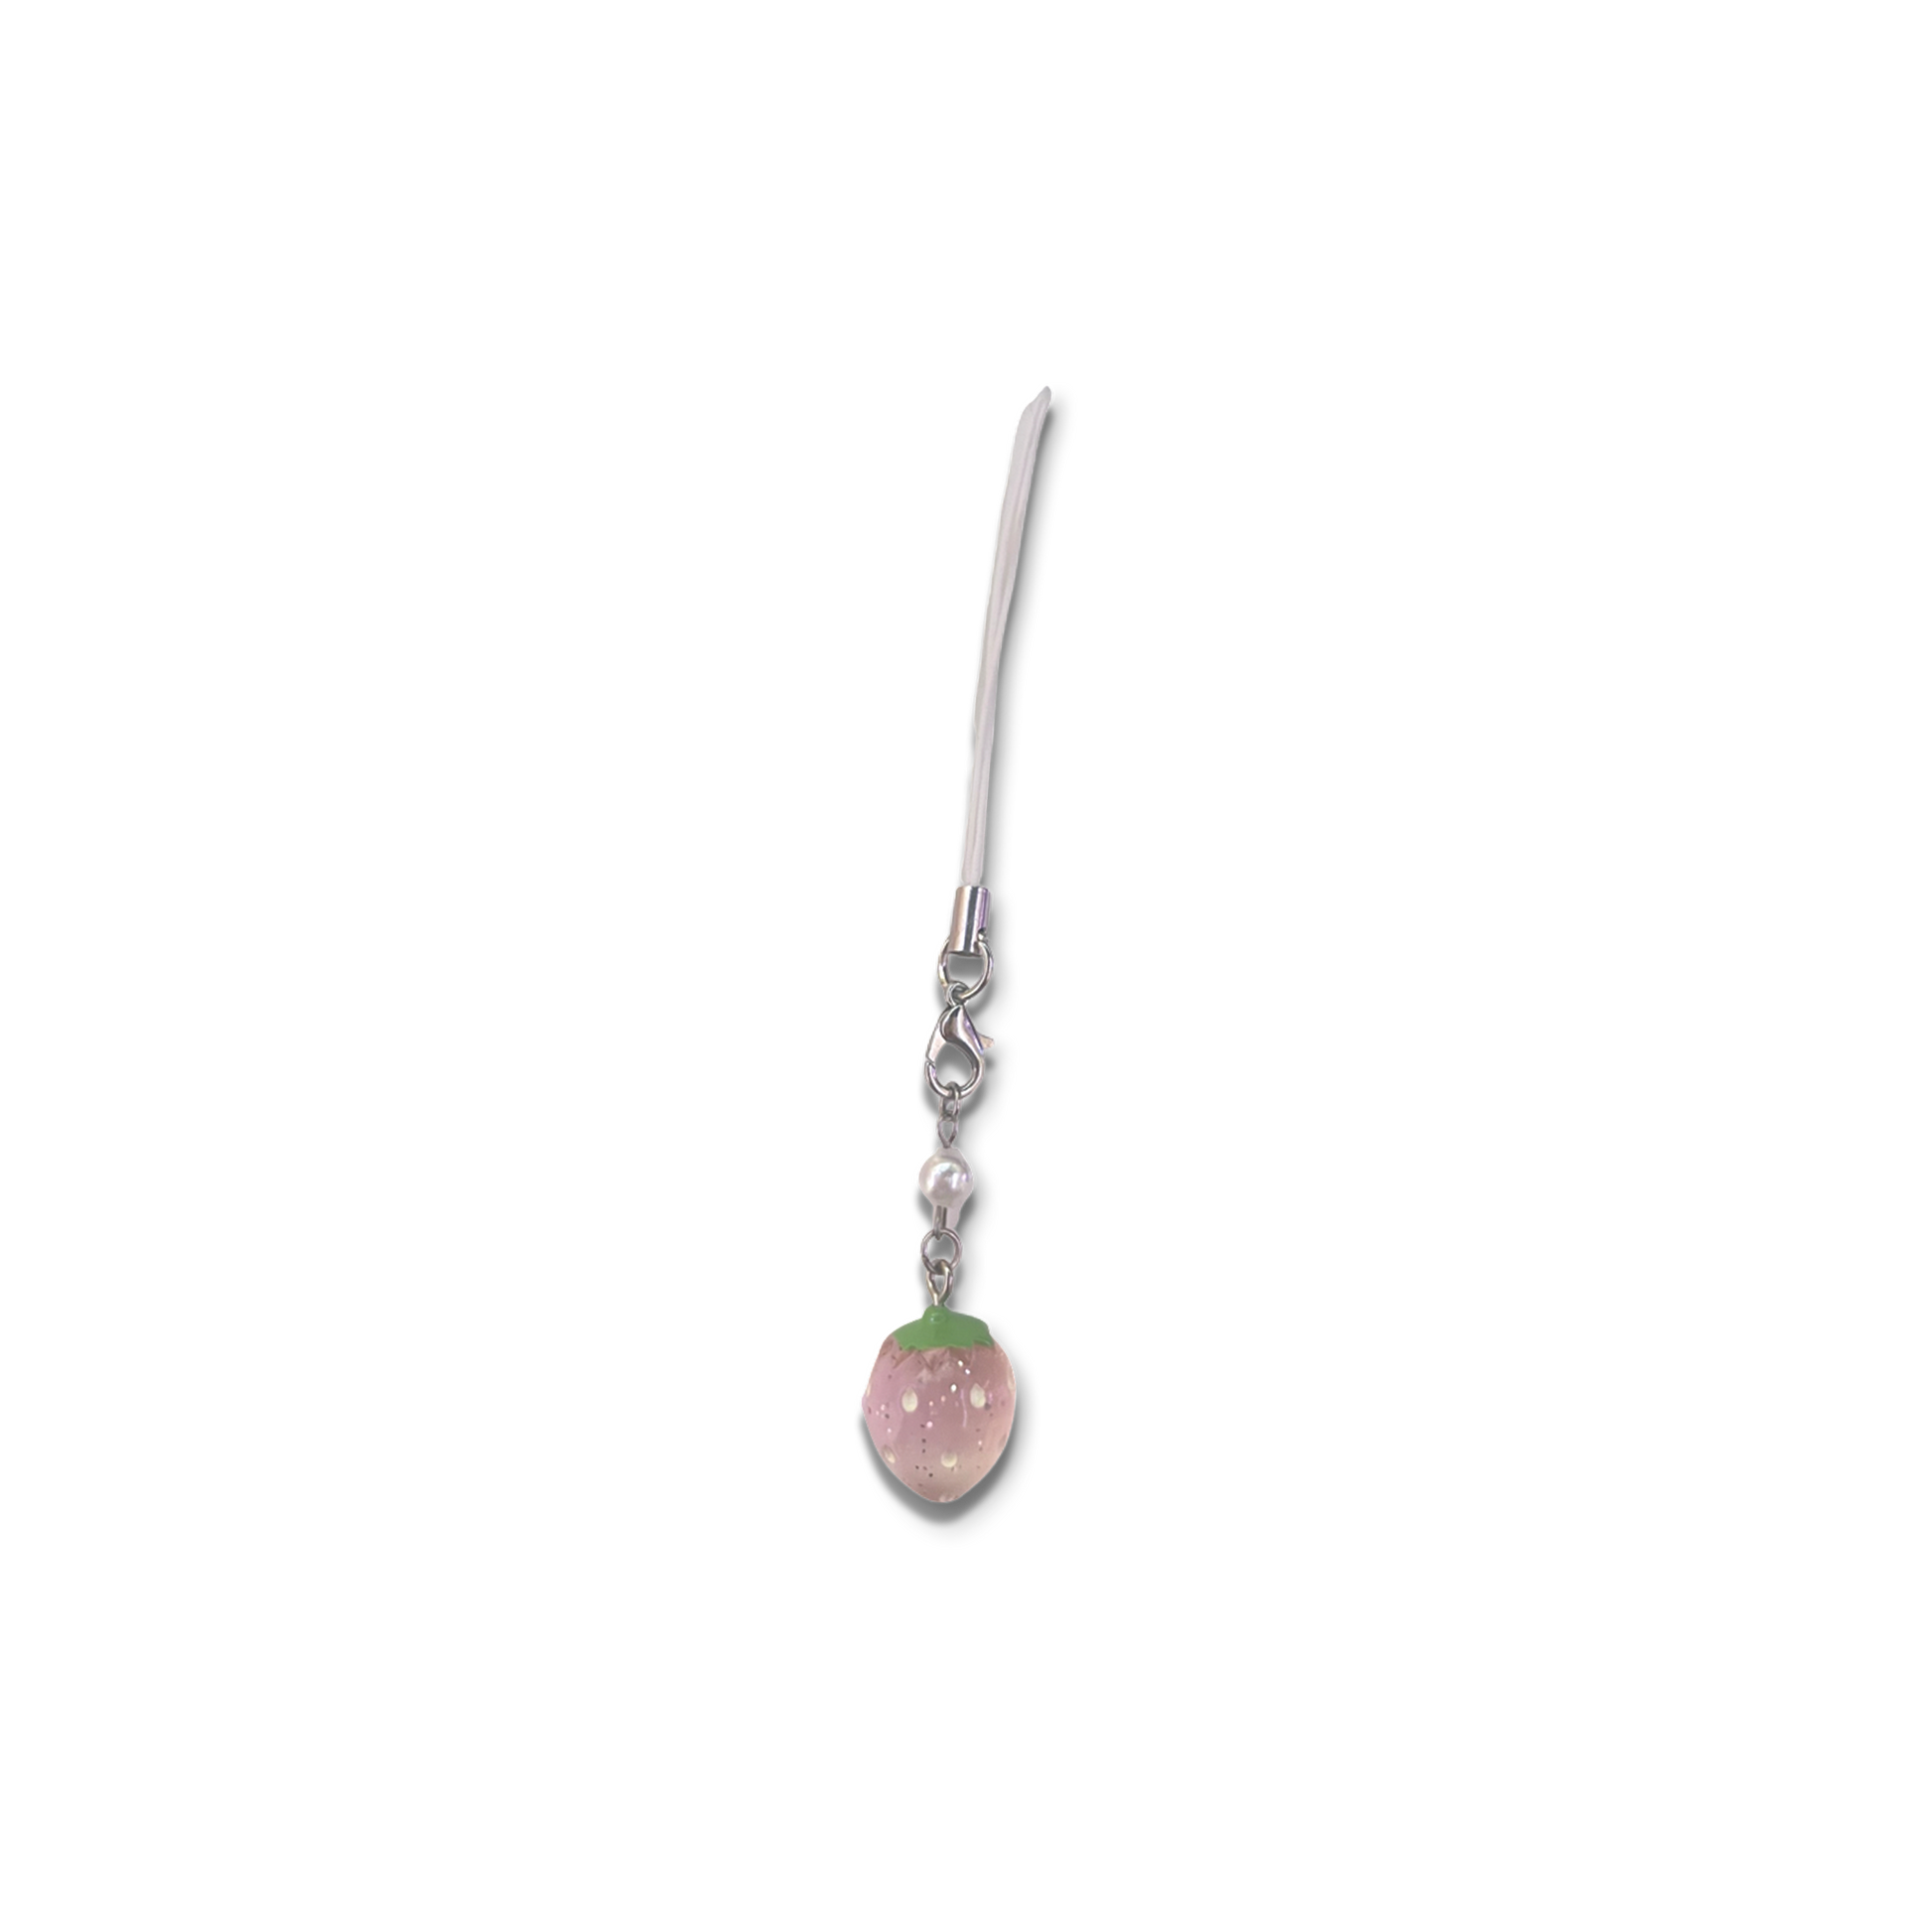 Small light pink strawberry charm with pearlescent bead and basic light pink phone strap.